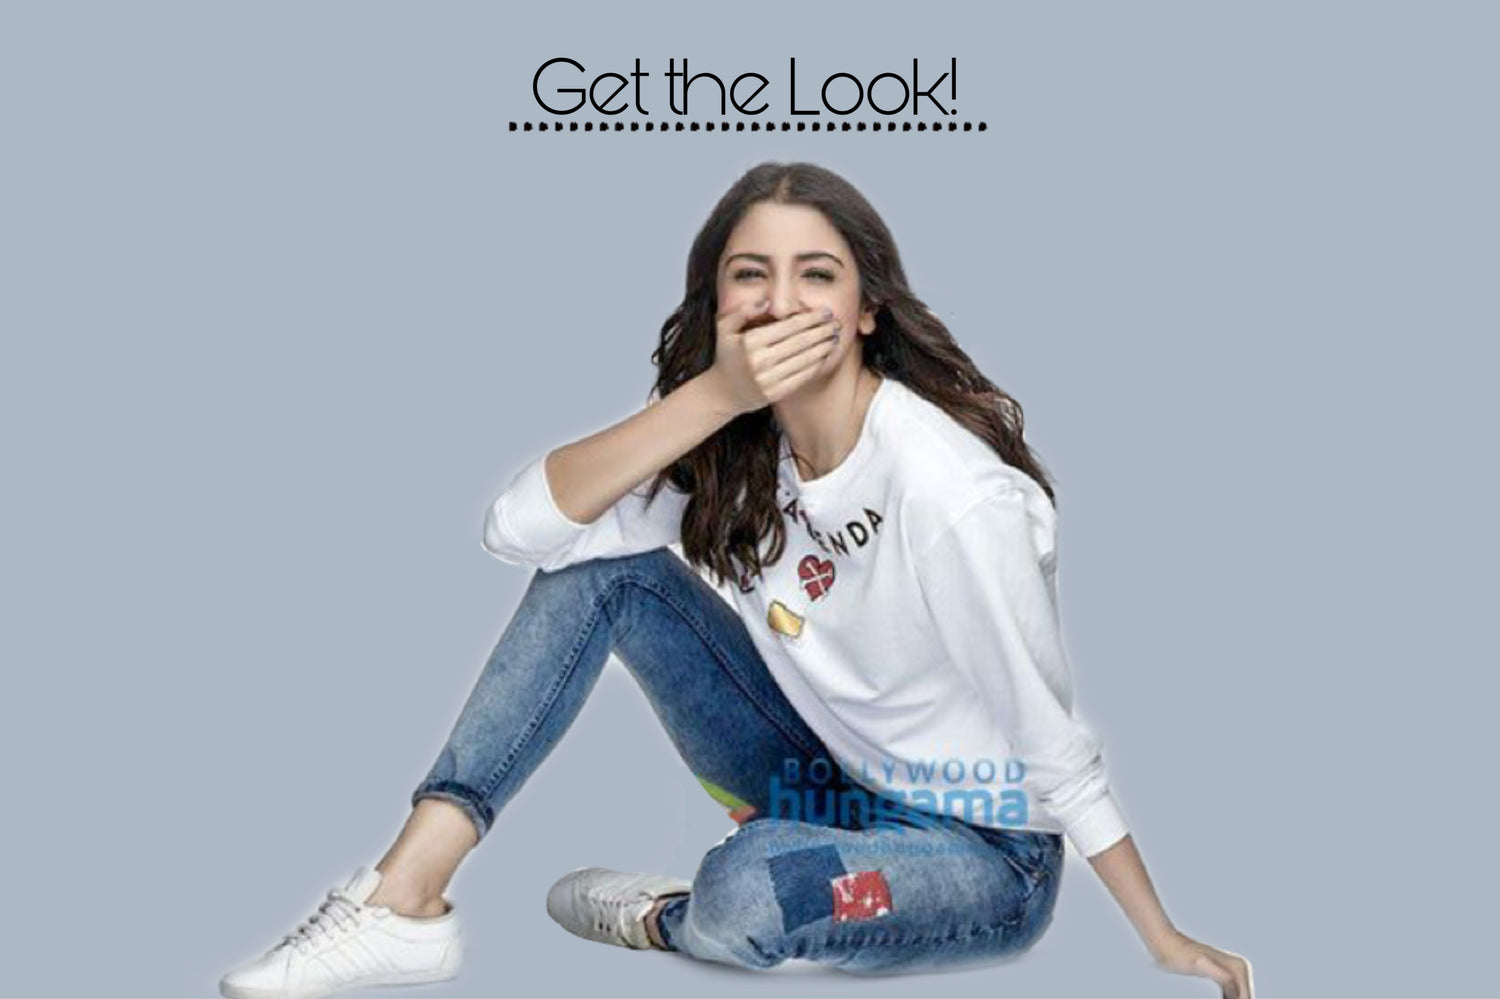 Ace The Anushka Sharma Look With Hair Extensions #AchieveTheLook